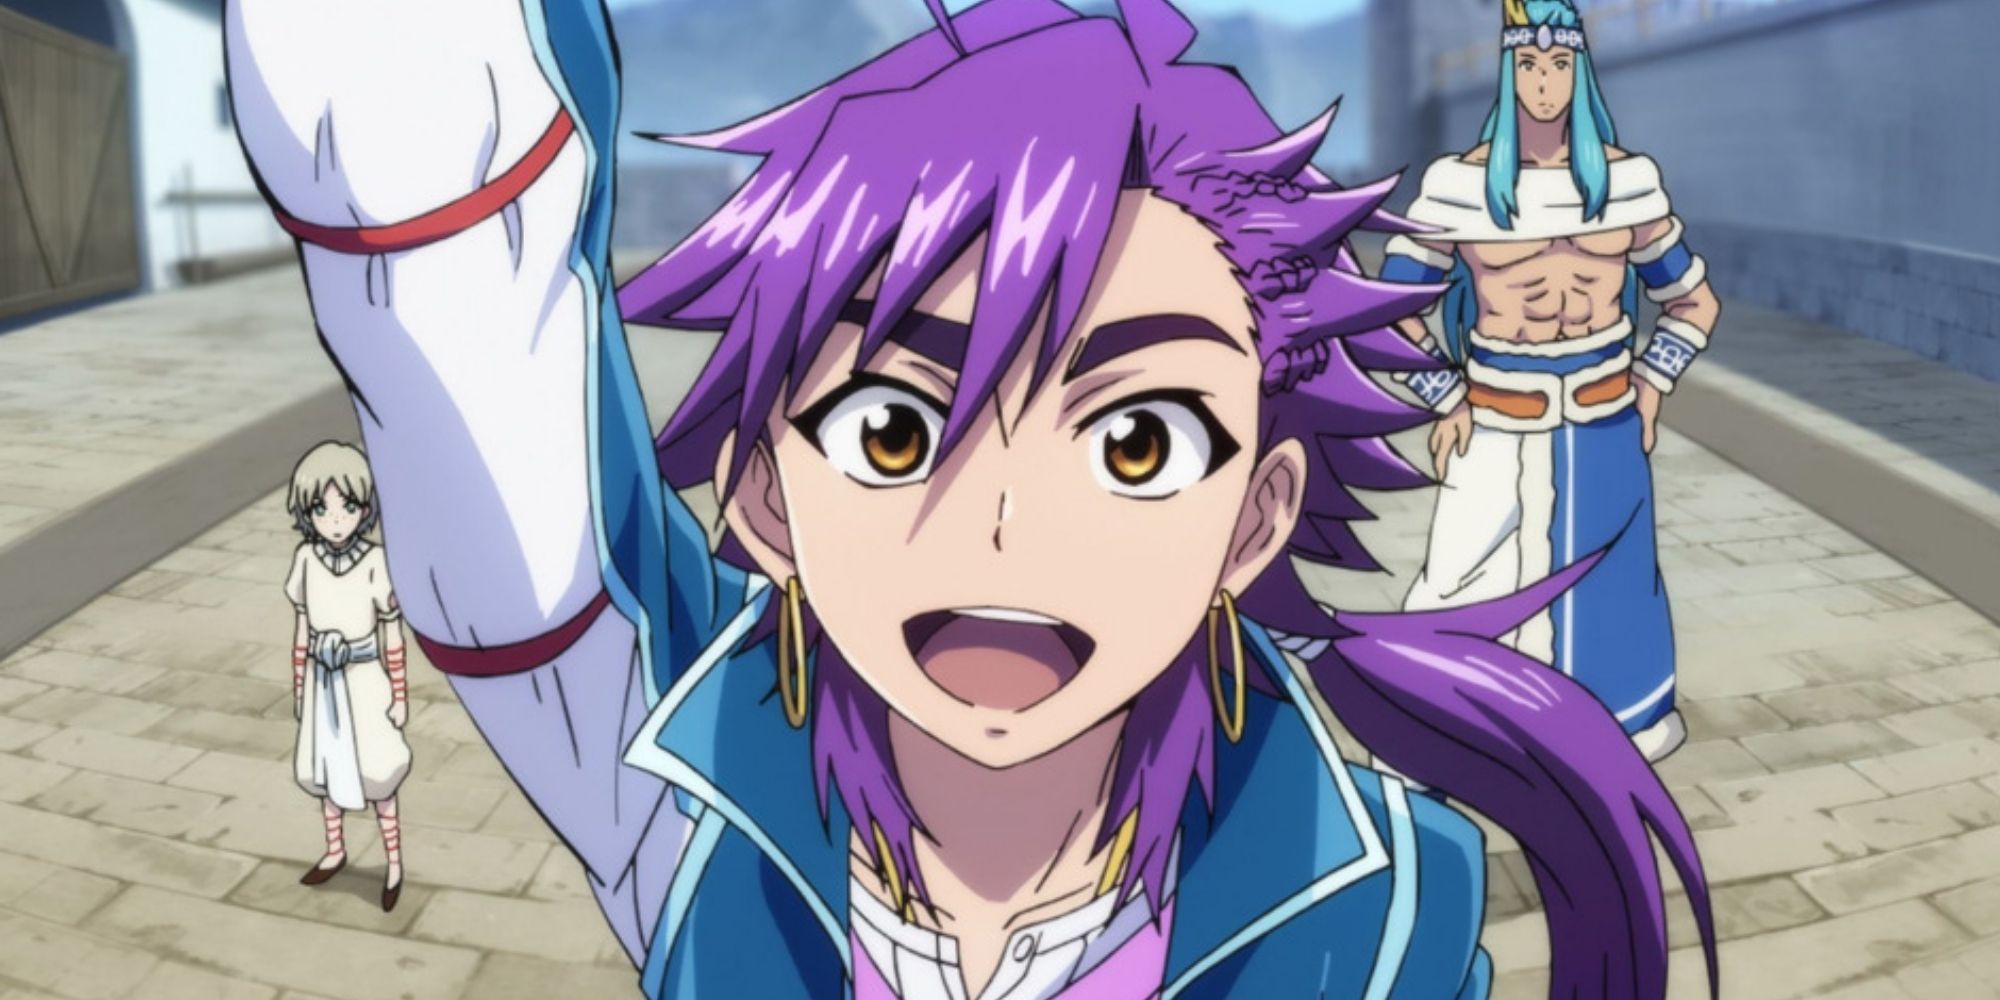 A close-up of Sinbad from the Magi series